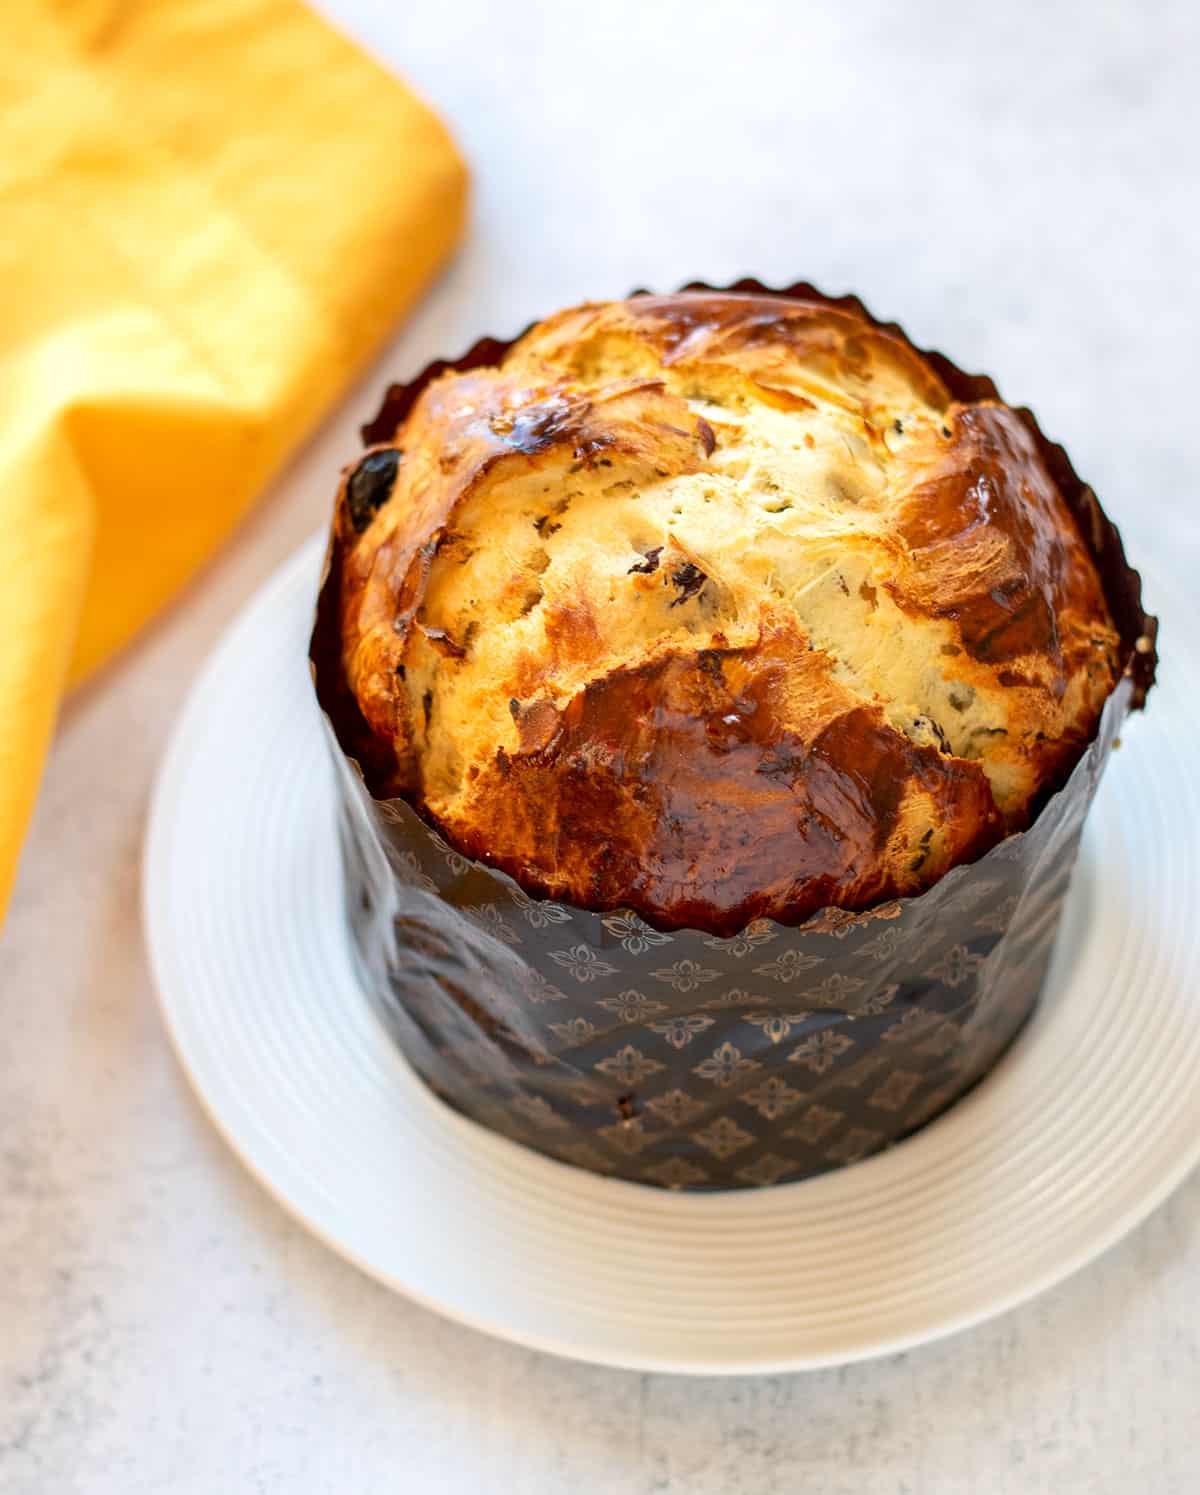 baked panettone in a paper mold on a plate